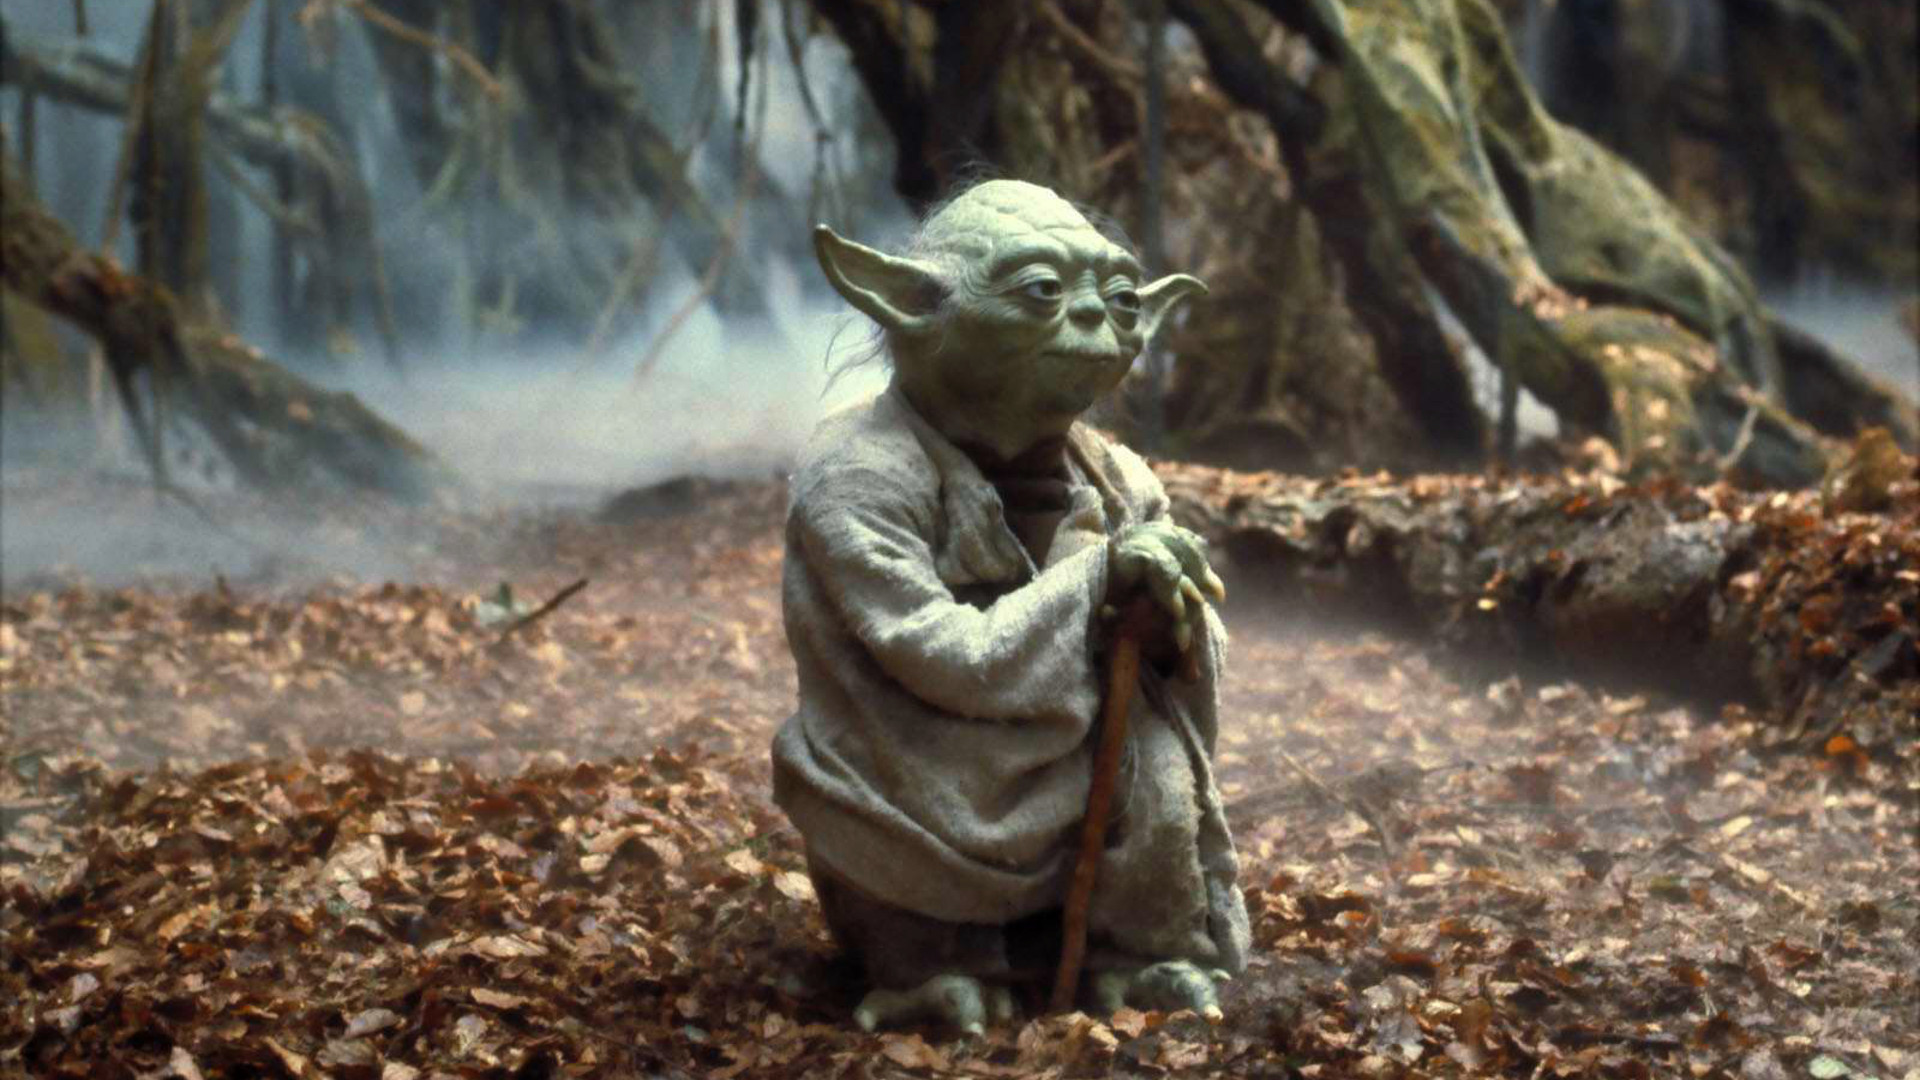 People 1920x1080 Yoda Star Wars: Episode V - The Empire Strikes Back Star Wars movies Jedi Dagobah Star Wars Heroes science fiction